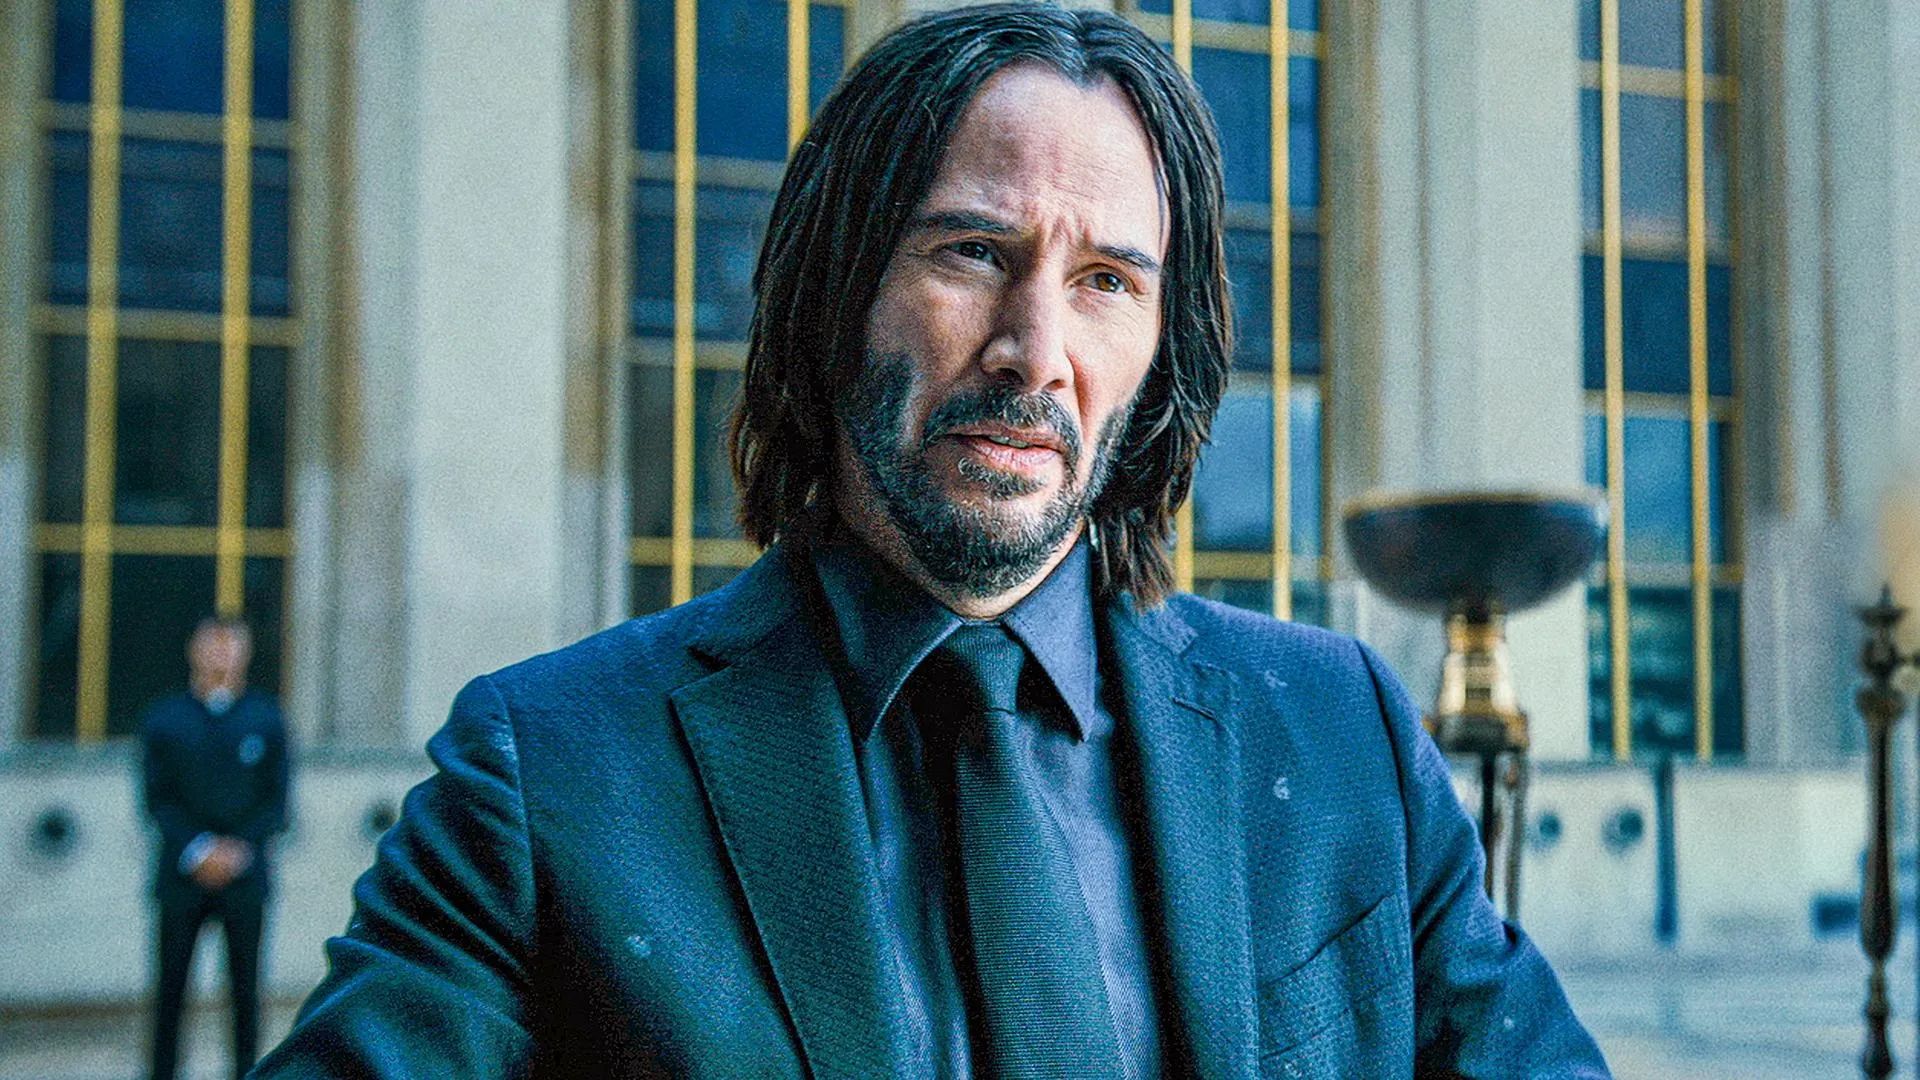 Lionsgate confirms John Wick 5 is happening after planned spin-offs, john  wick 5 